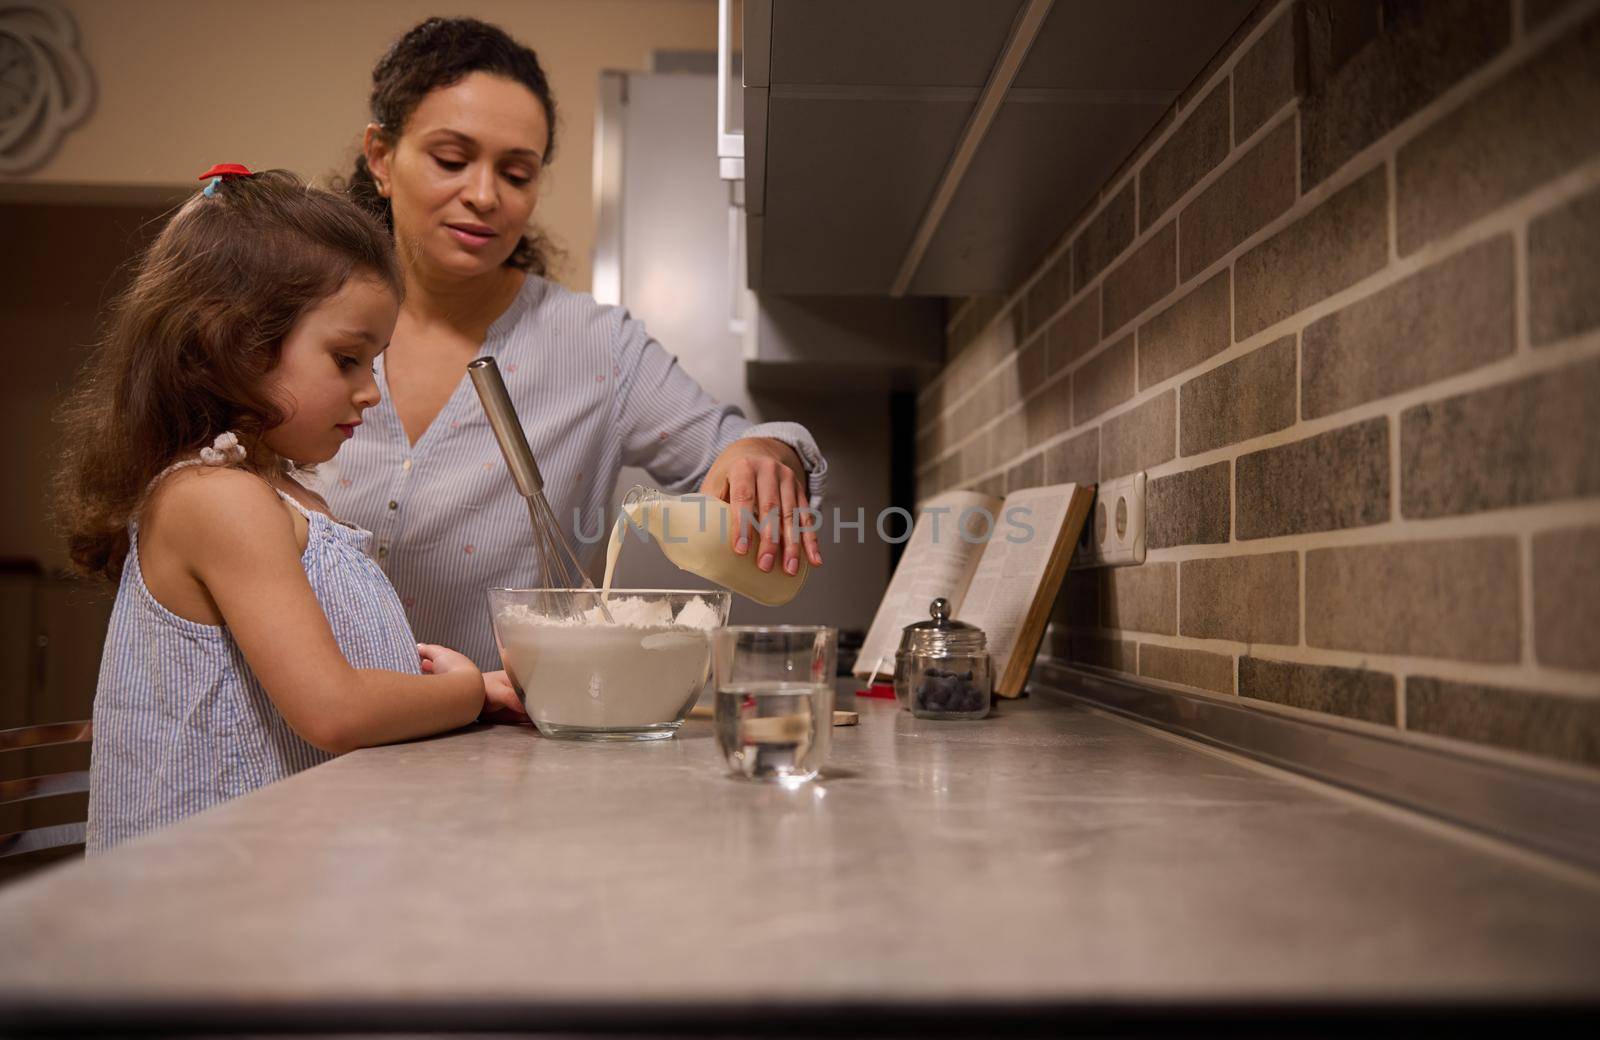 Lifestyle portrait of a mom pouring milk into bowl of flour and mixing ingredients with a whisk to prepare pancake dough. Mother and daughter - beautiful child are cooking together in the home kitchen by artgf